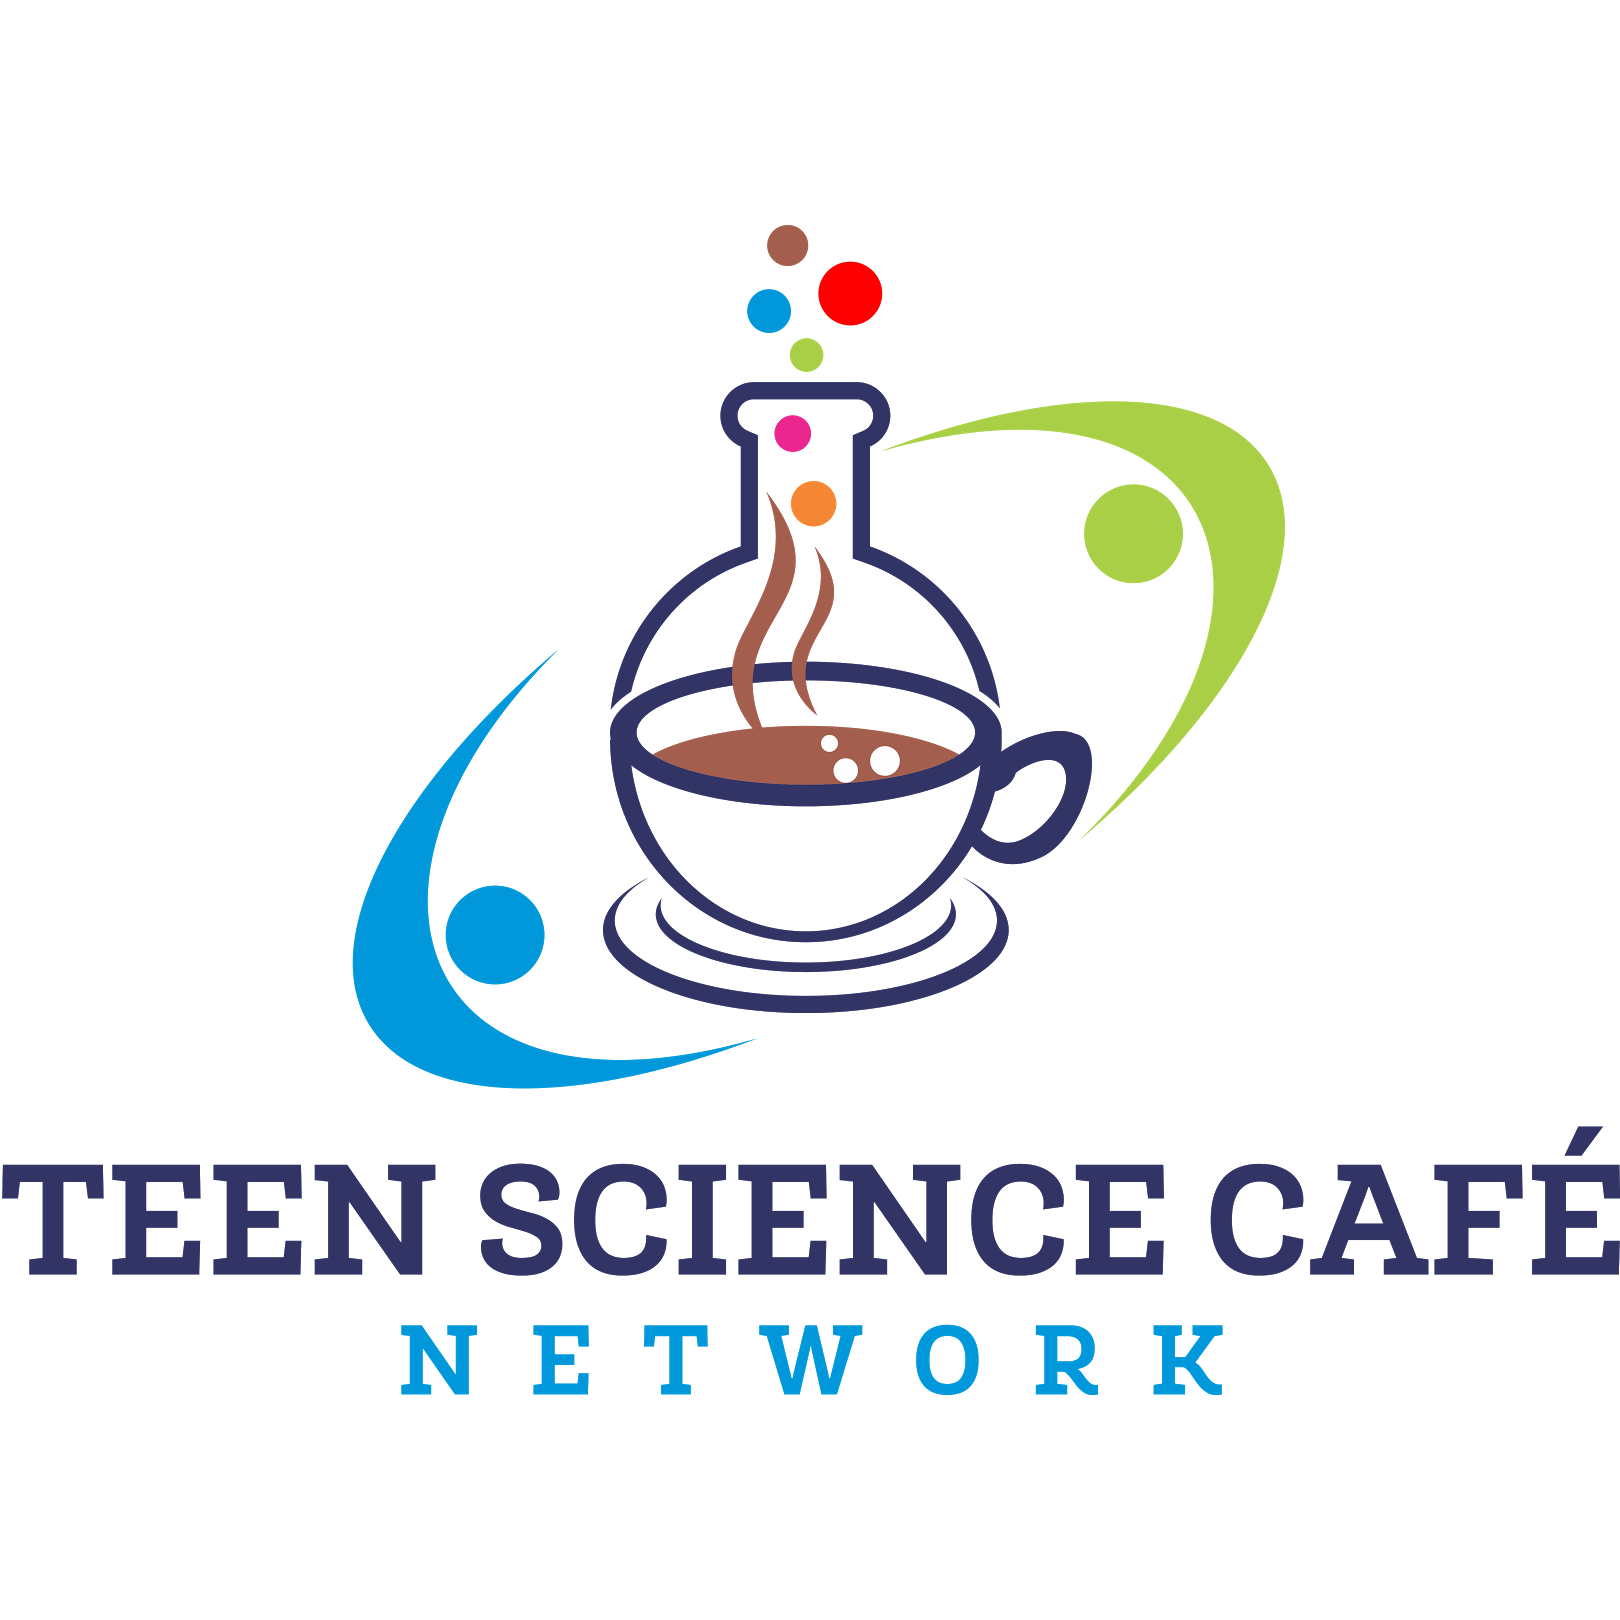 Teen Science Cafe Network logo